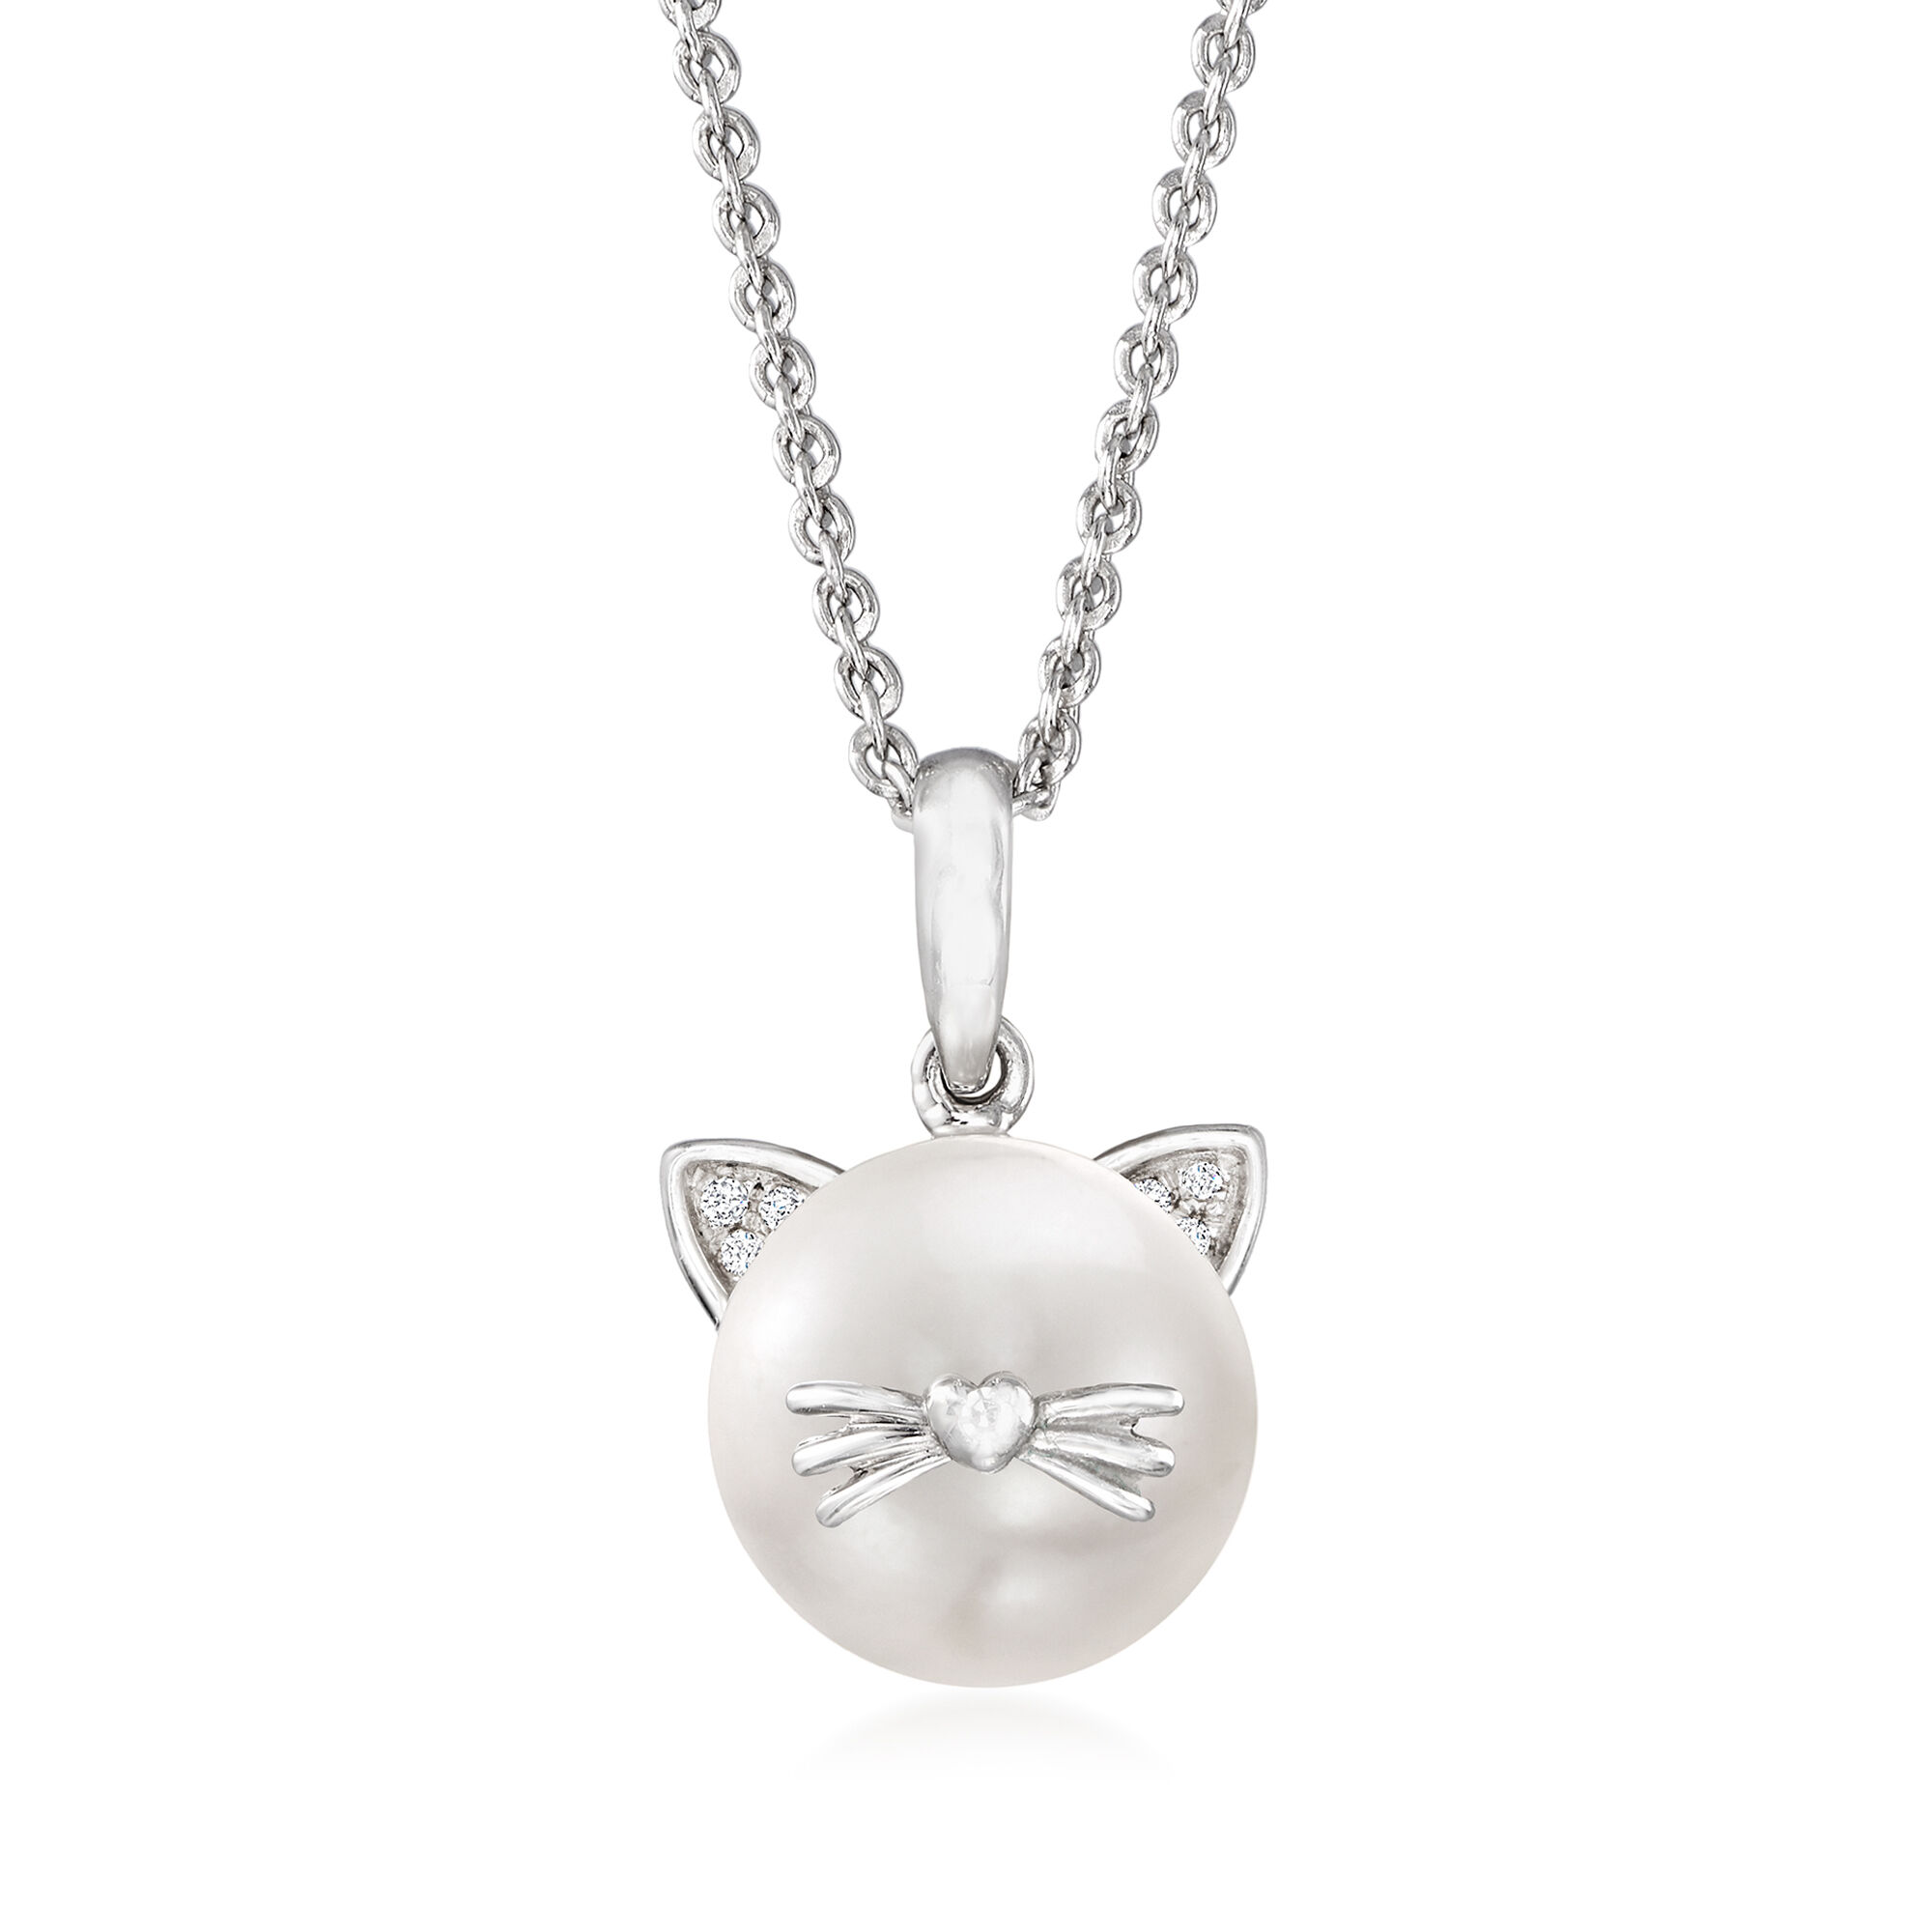 LARGE CAT FACE MODERN SILVER TONE PENDANT AND CHAIN